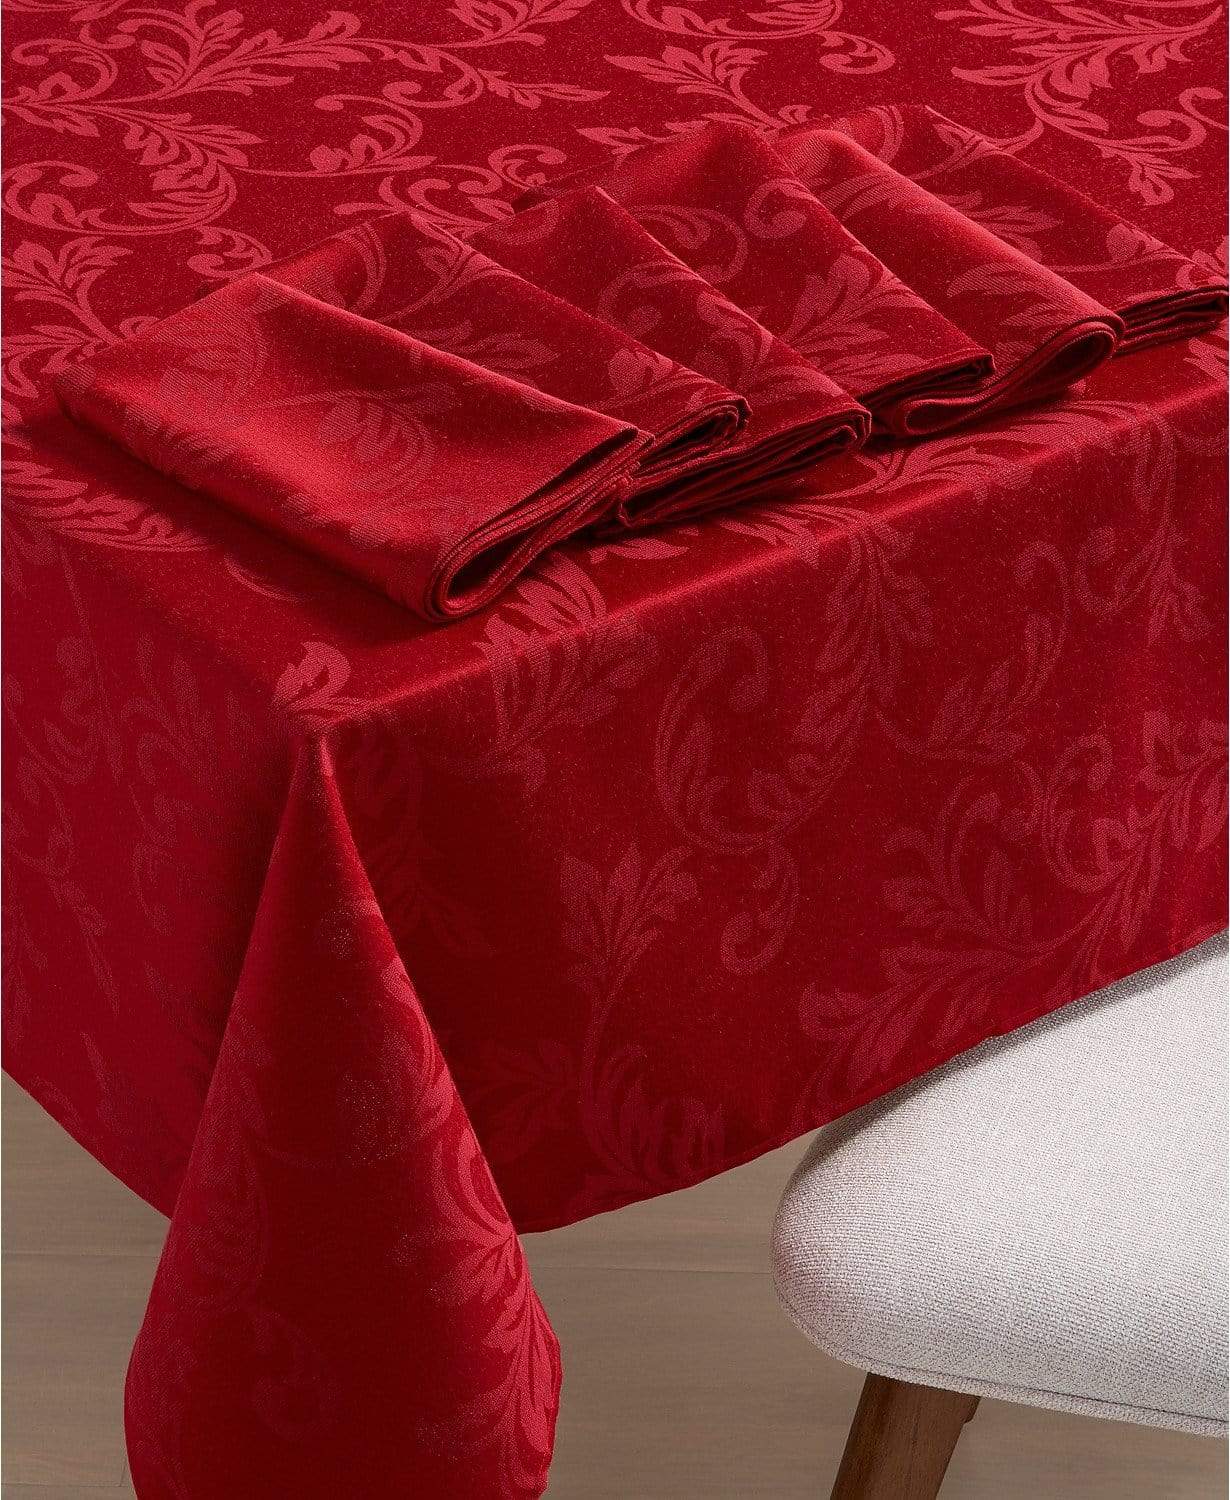 Martha Stewart Household Red / 152cm x 305cm Scroll Dining Set with 8 Napkins